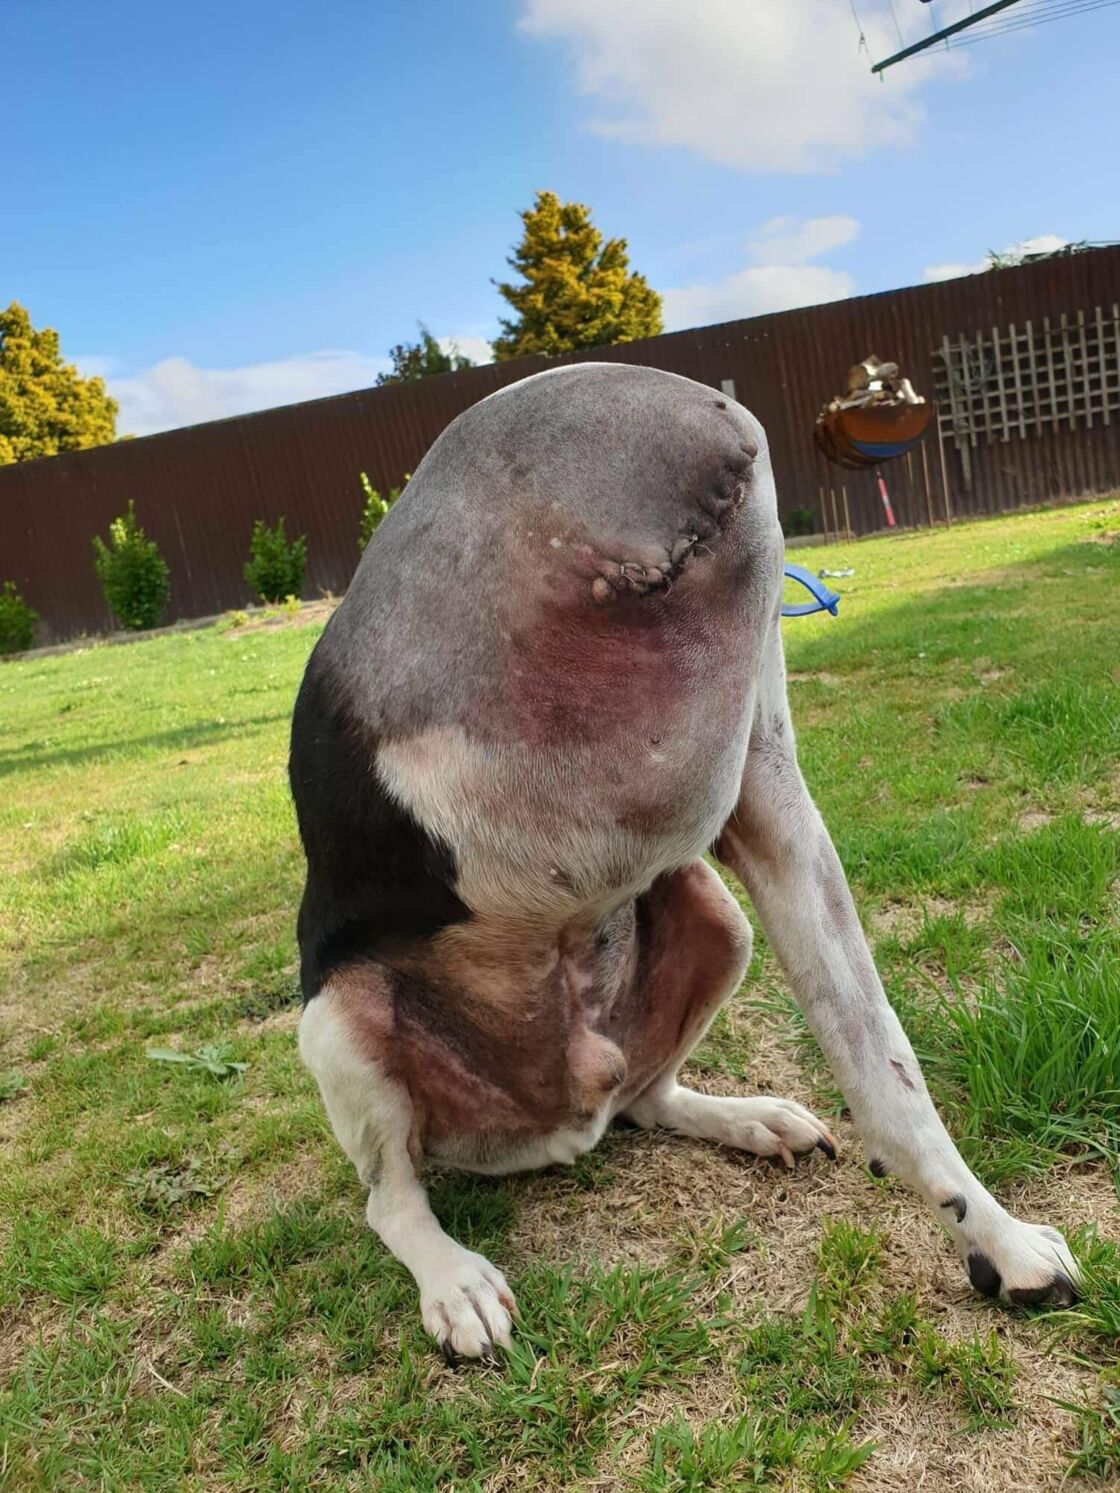 What On Earth Is Going On In This Photo Of A Seemingly Headless Dog